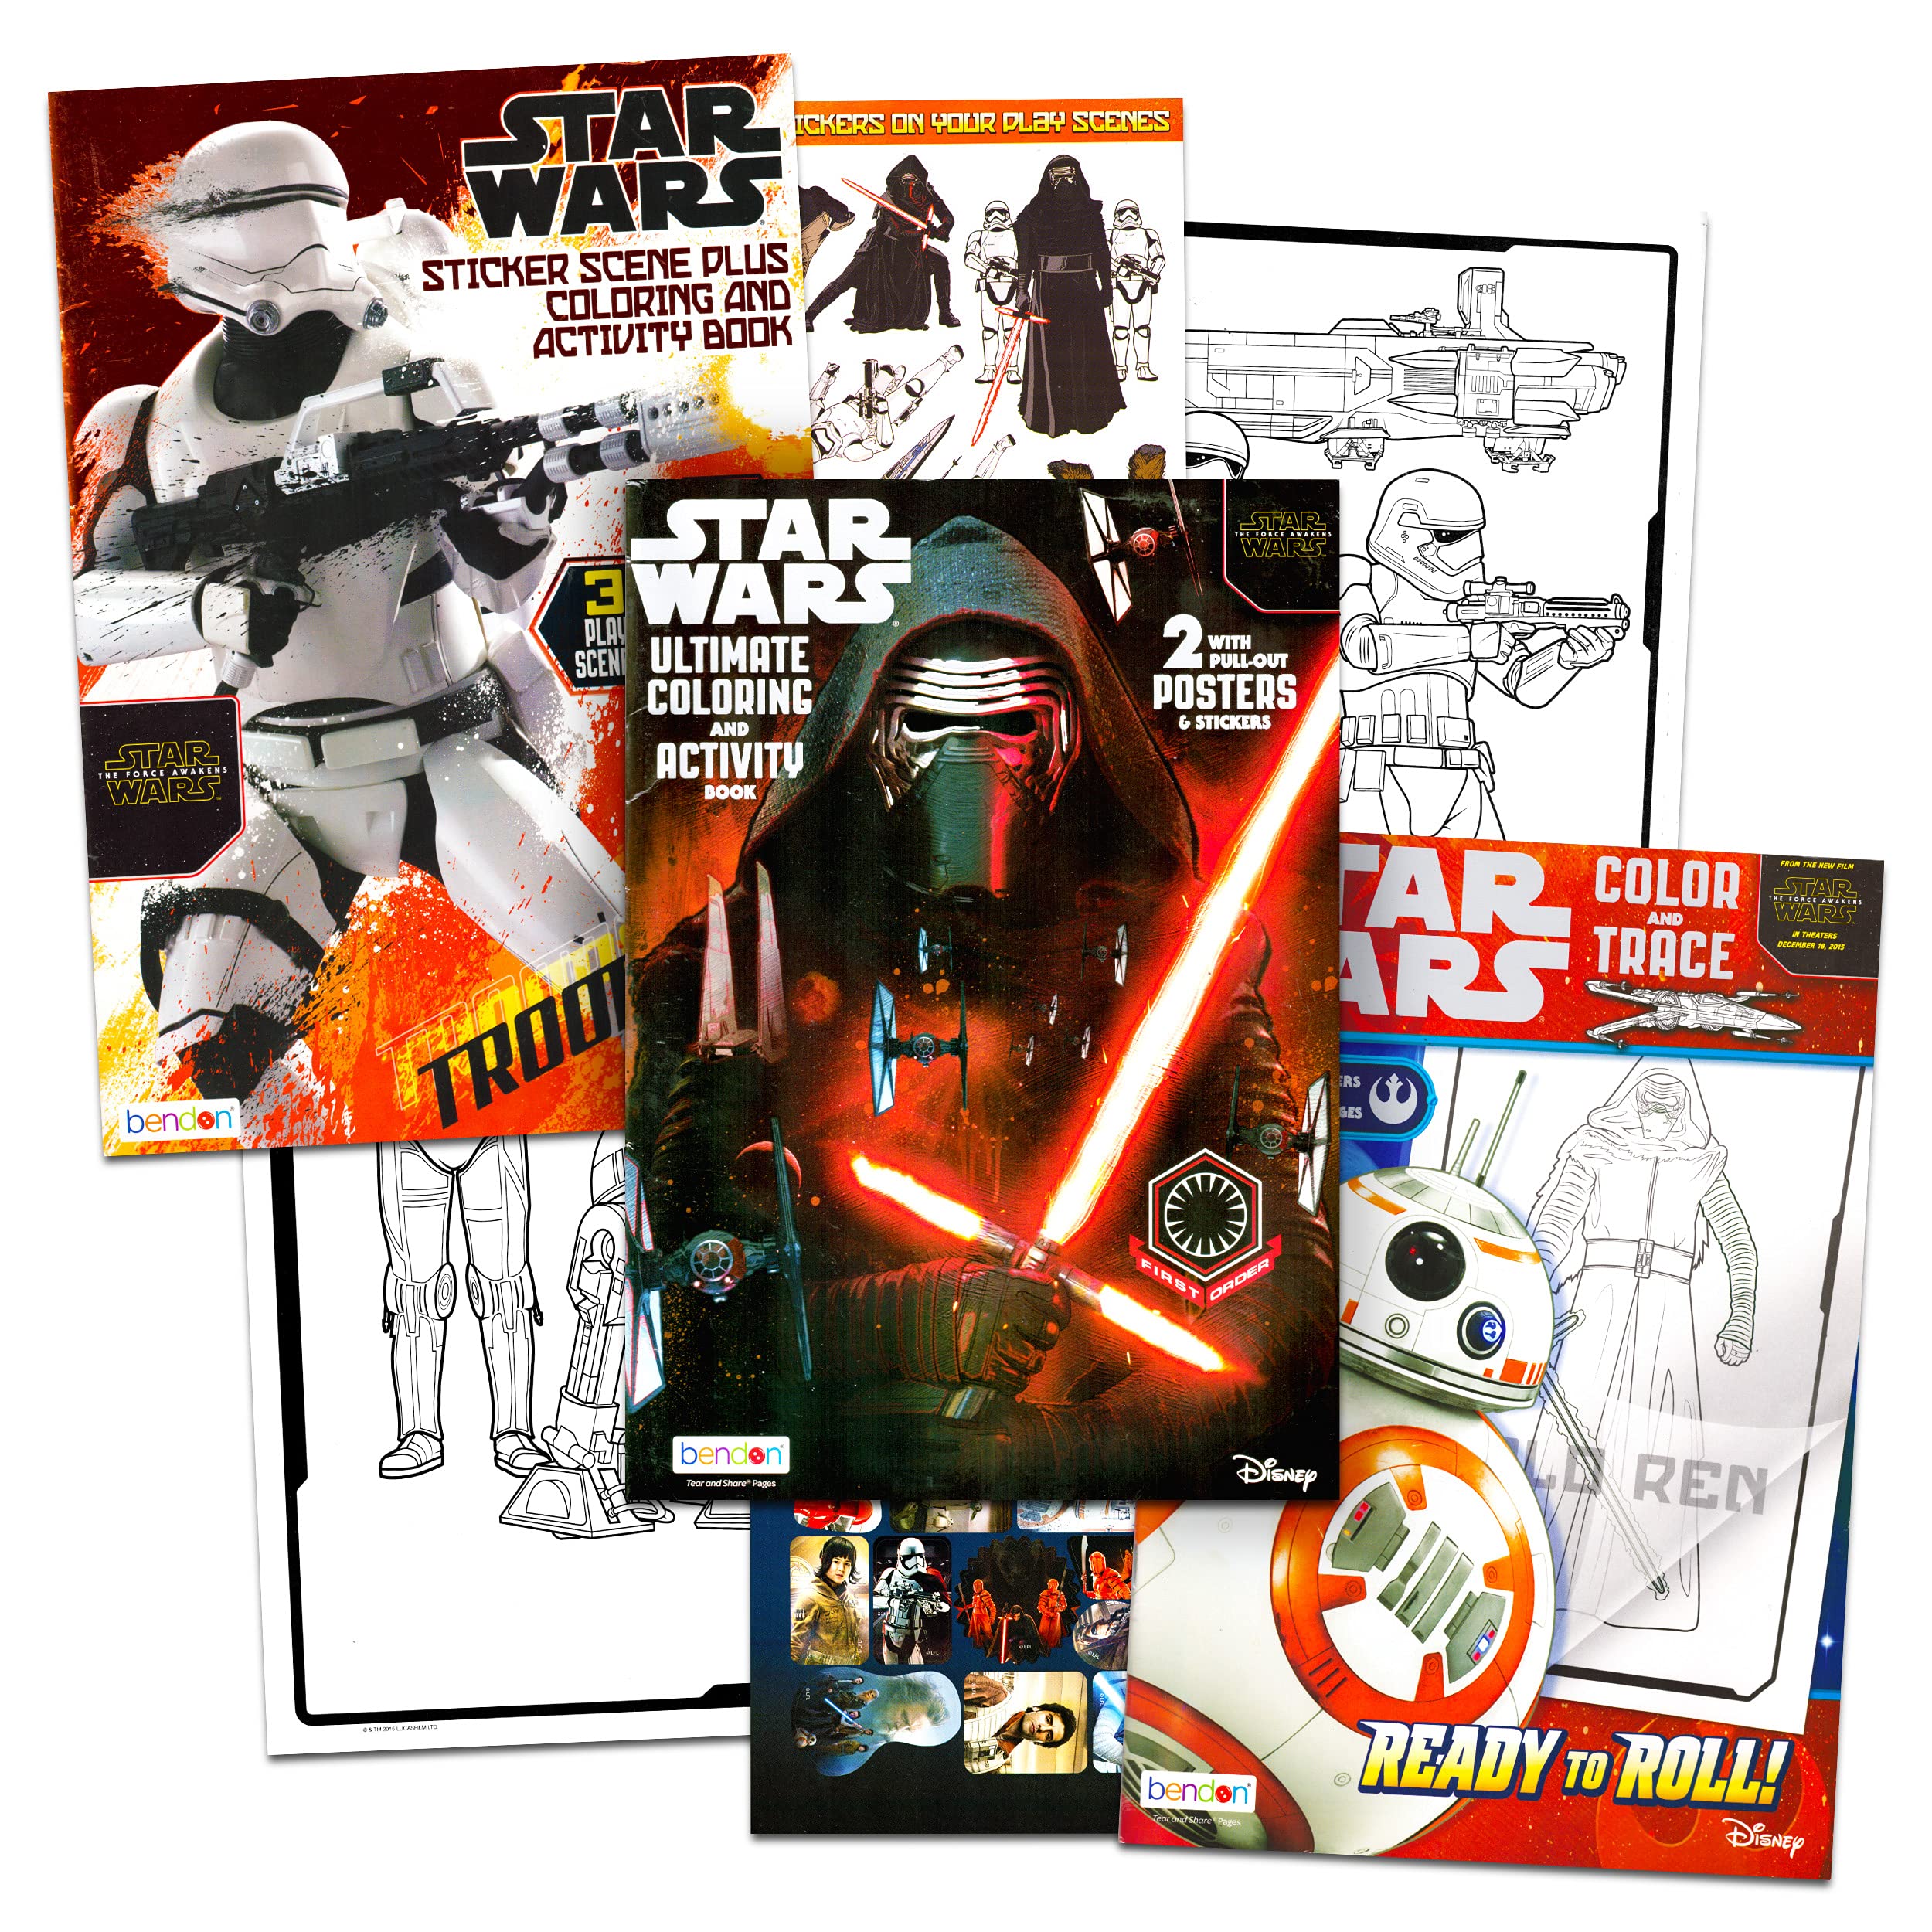 Star wars coloring book bundle star wars the force awakens coloring and activity books featuring kylo ren rey stormtroopers bb